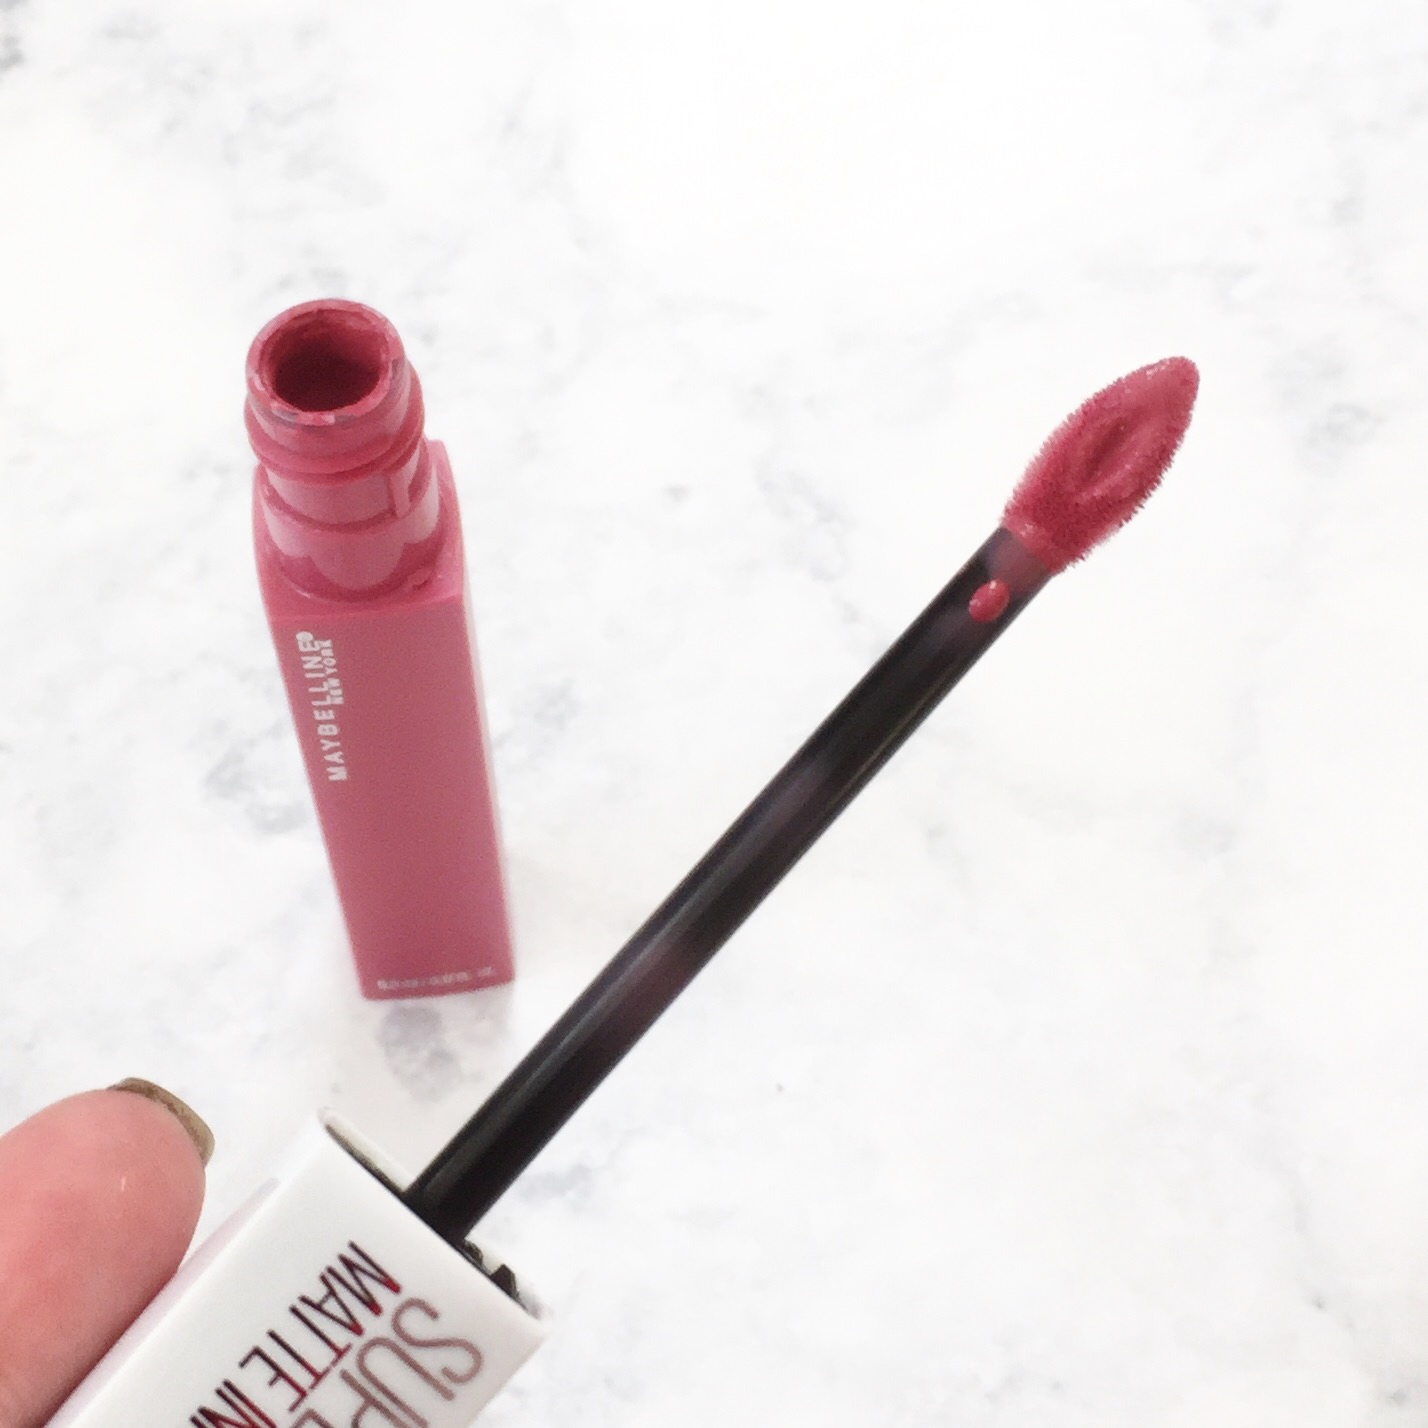 Maybelline Superstay Matte Ink Review